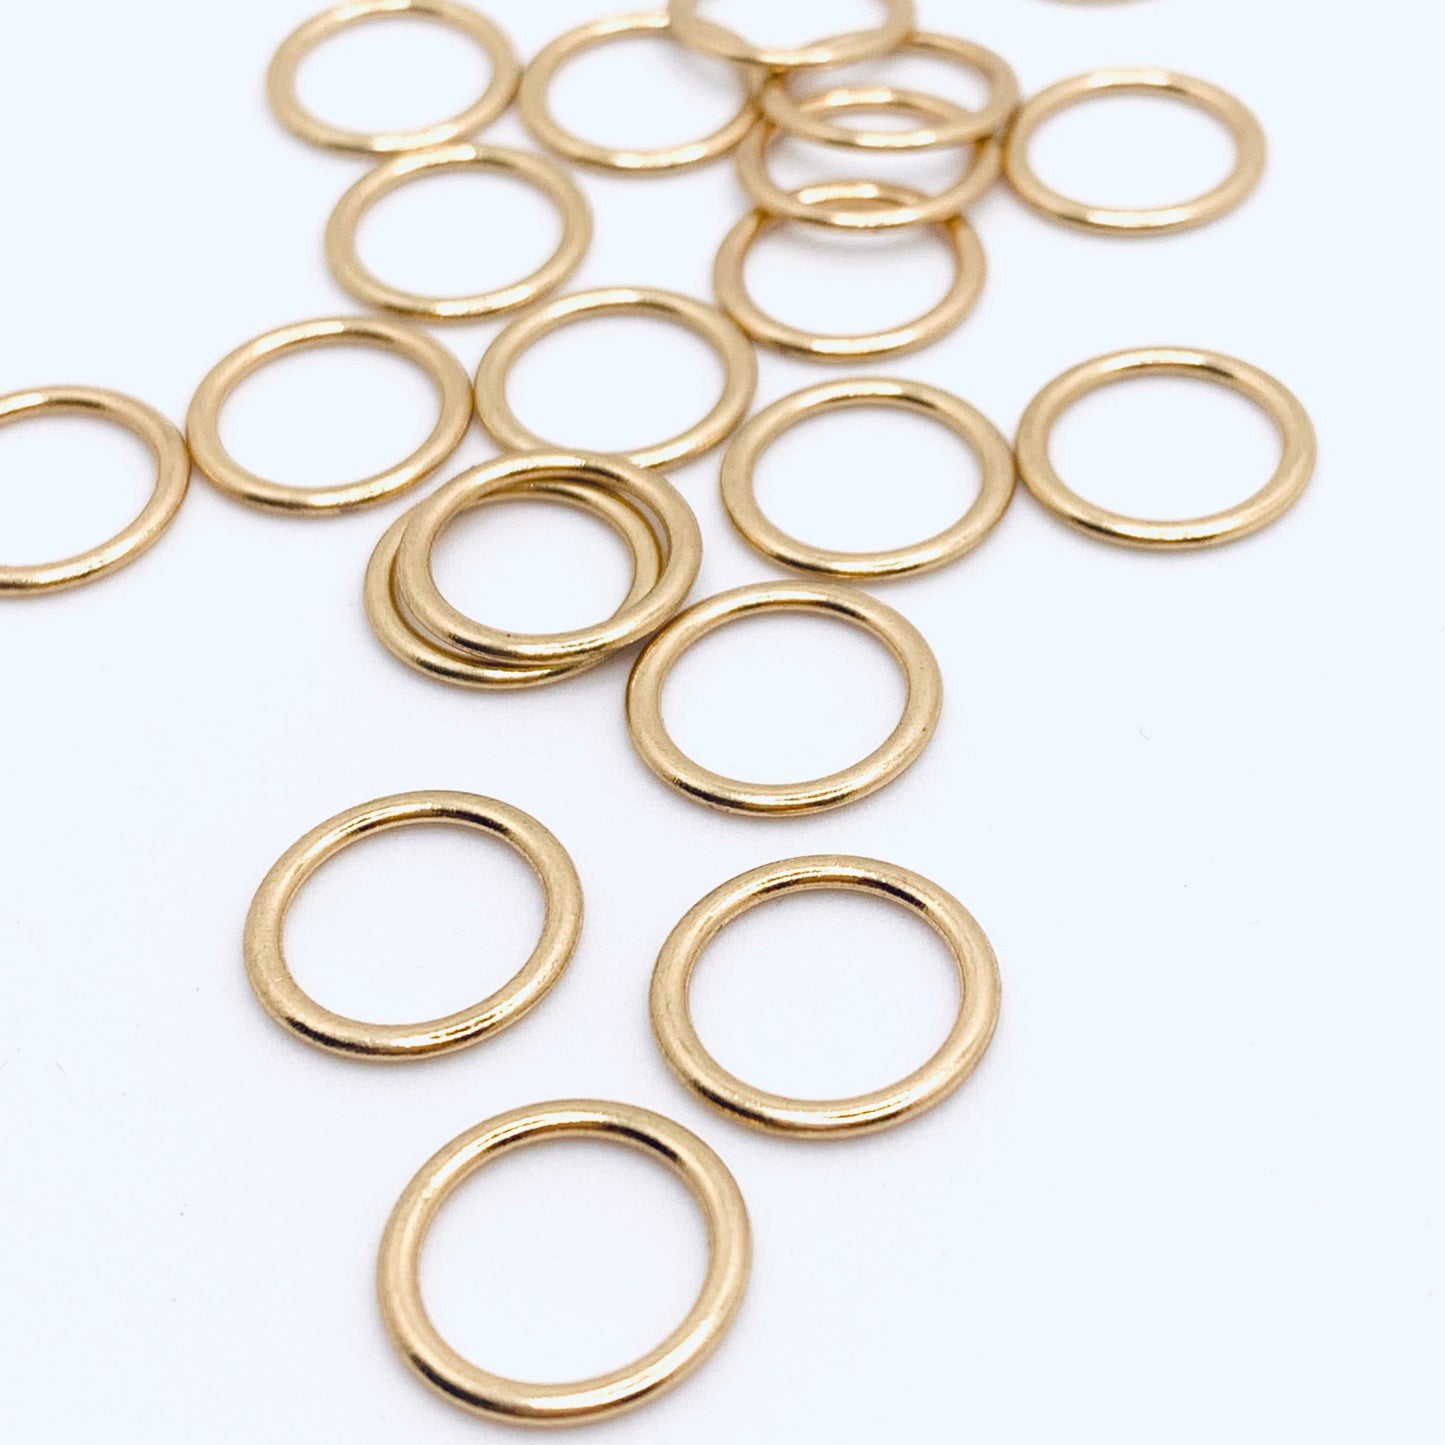 Bulk Buy 50 x 10mm Rings for Bra Making | Gold & Silver Fittings | Discounted price